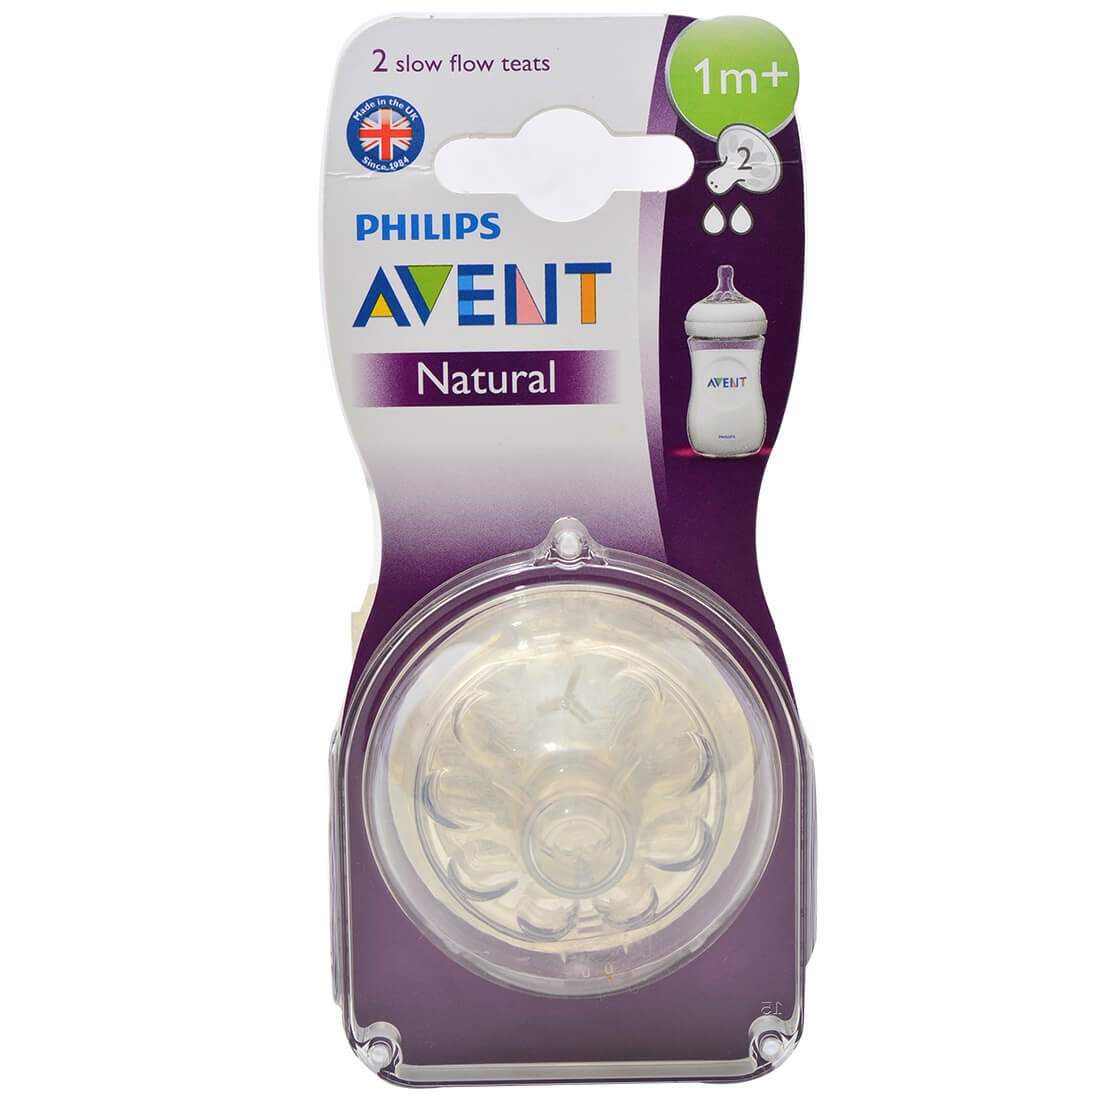 Philips Avent Natural Teat 2 Holes Slow Flow for 1m+